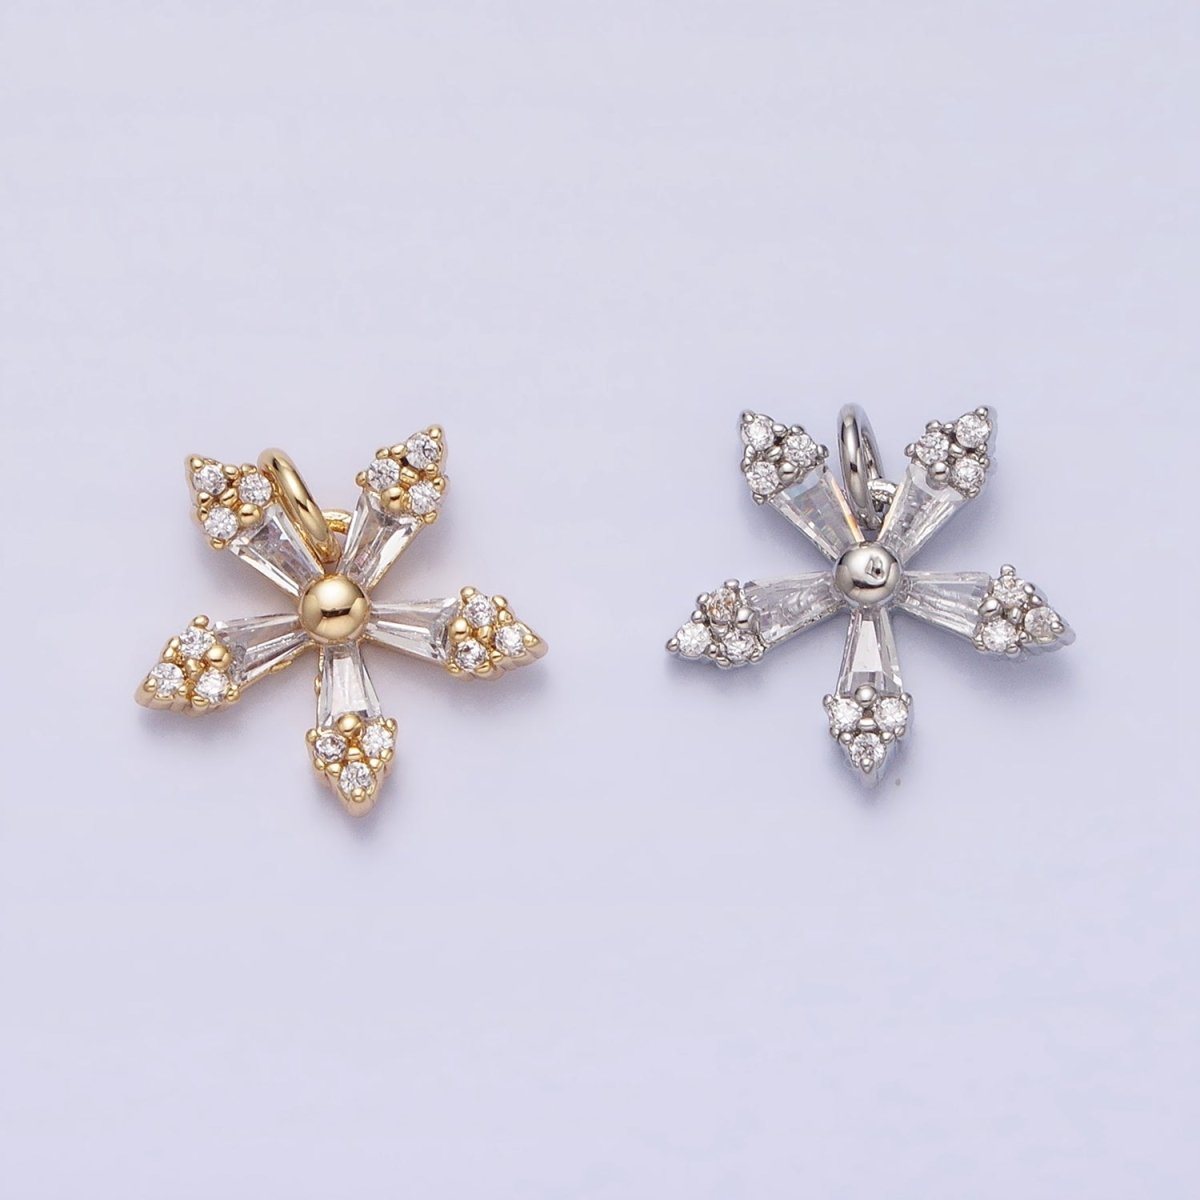 Mini Snow Flake Charm Clear Baguette Winter Pendant Jewelry Inspired in gold, silver AC506 AC507 - DLUXCA